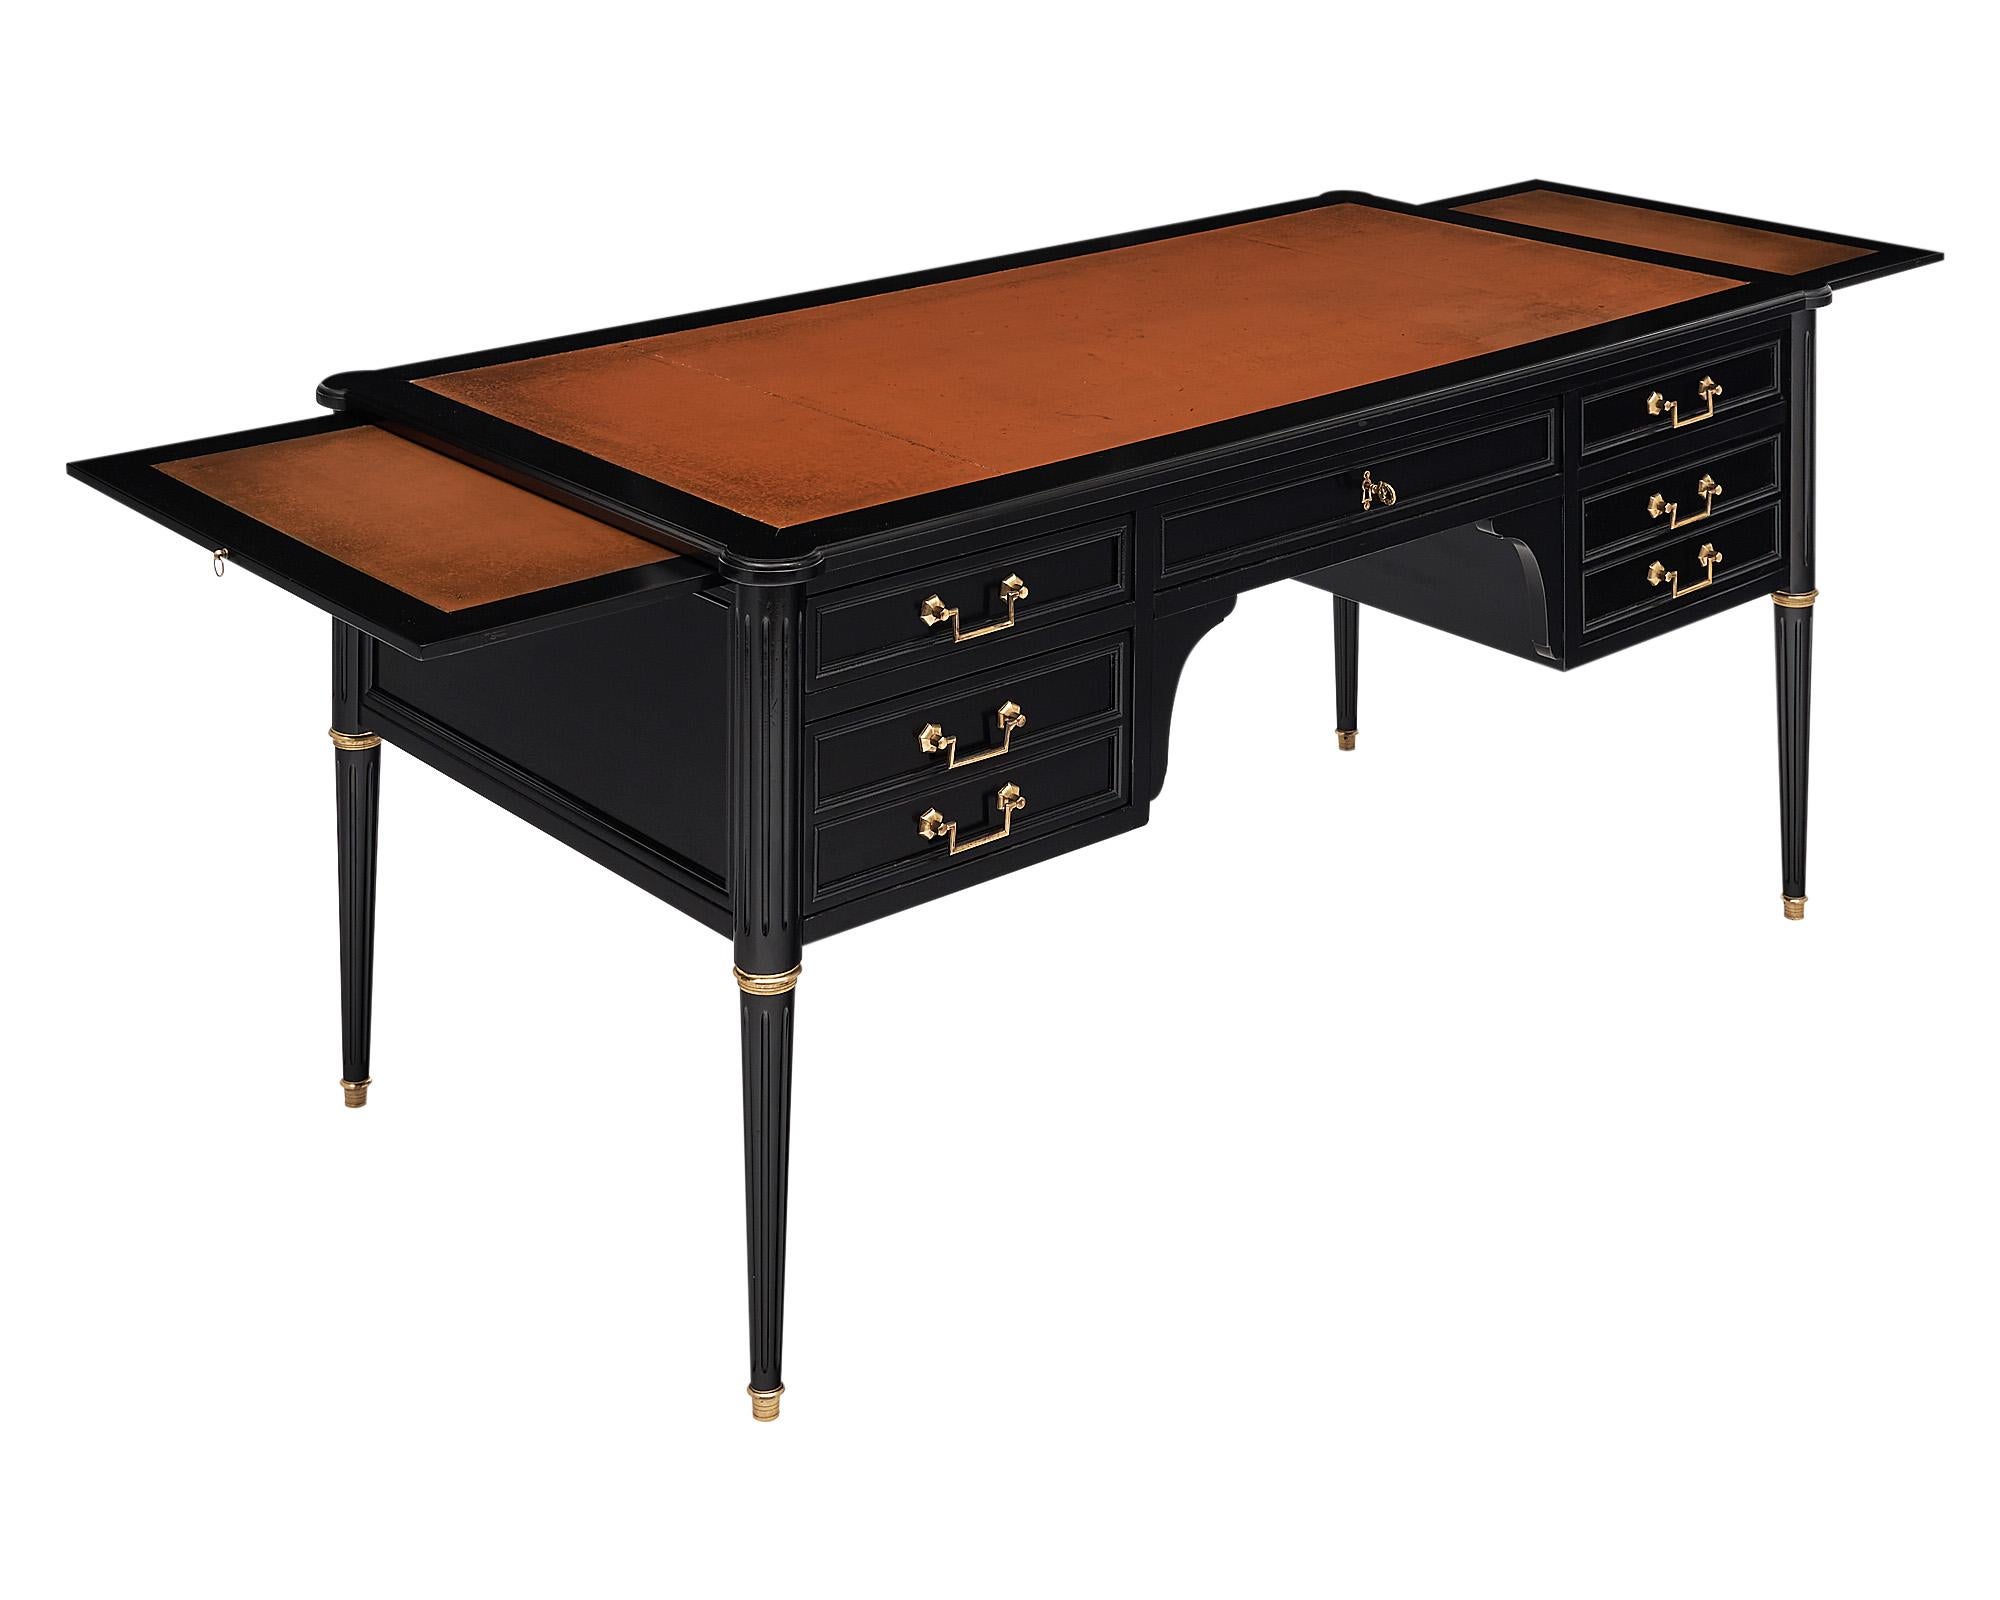 Desk, French, in the Louis XVI style with the original leather top and striking tapered and fluted legs. The important desk features ample storage inside the dovetailed drawers and additional pull out extension tablets. Each leaf/tablet adds an